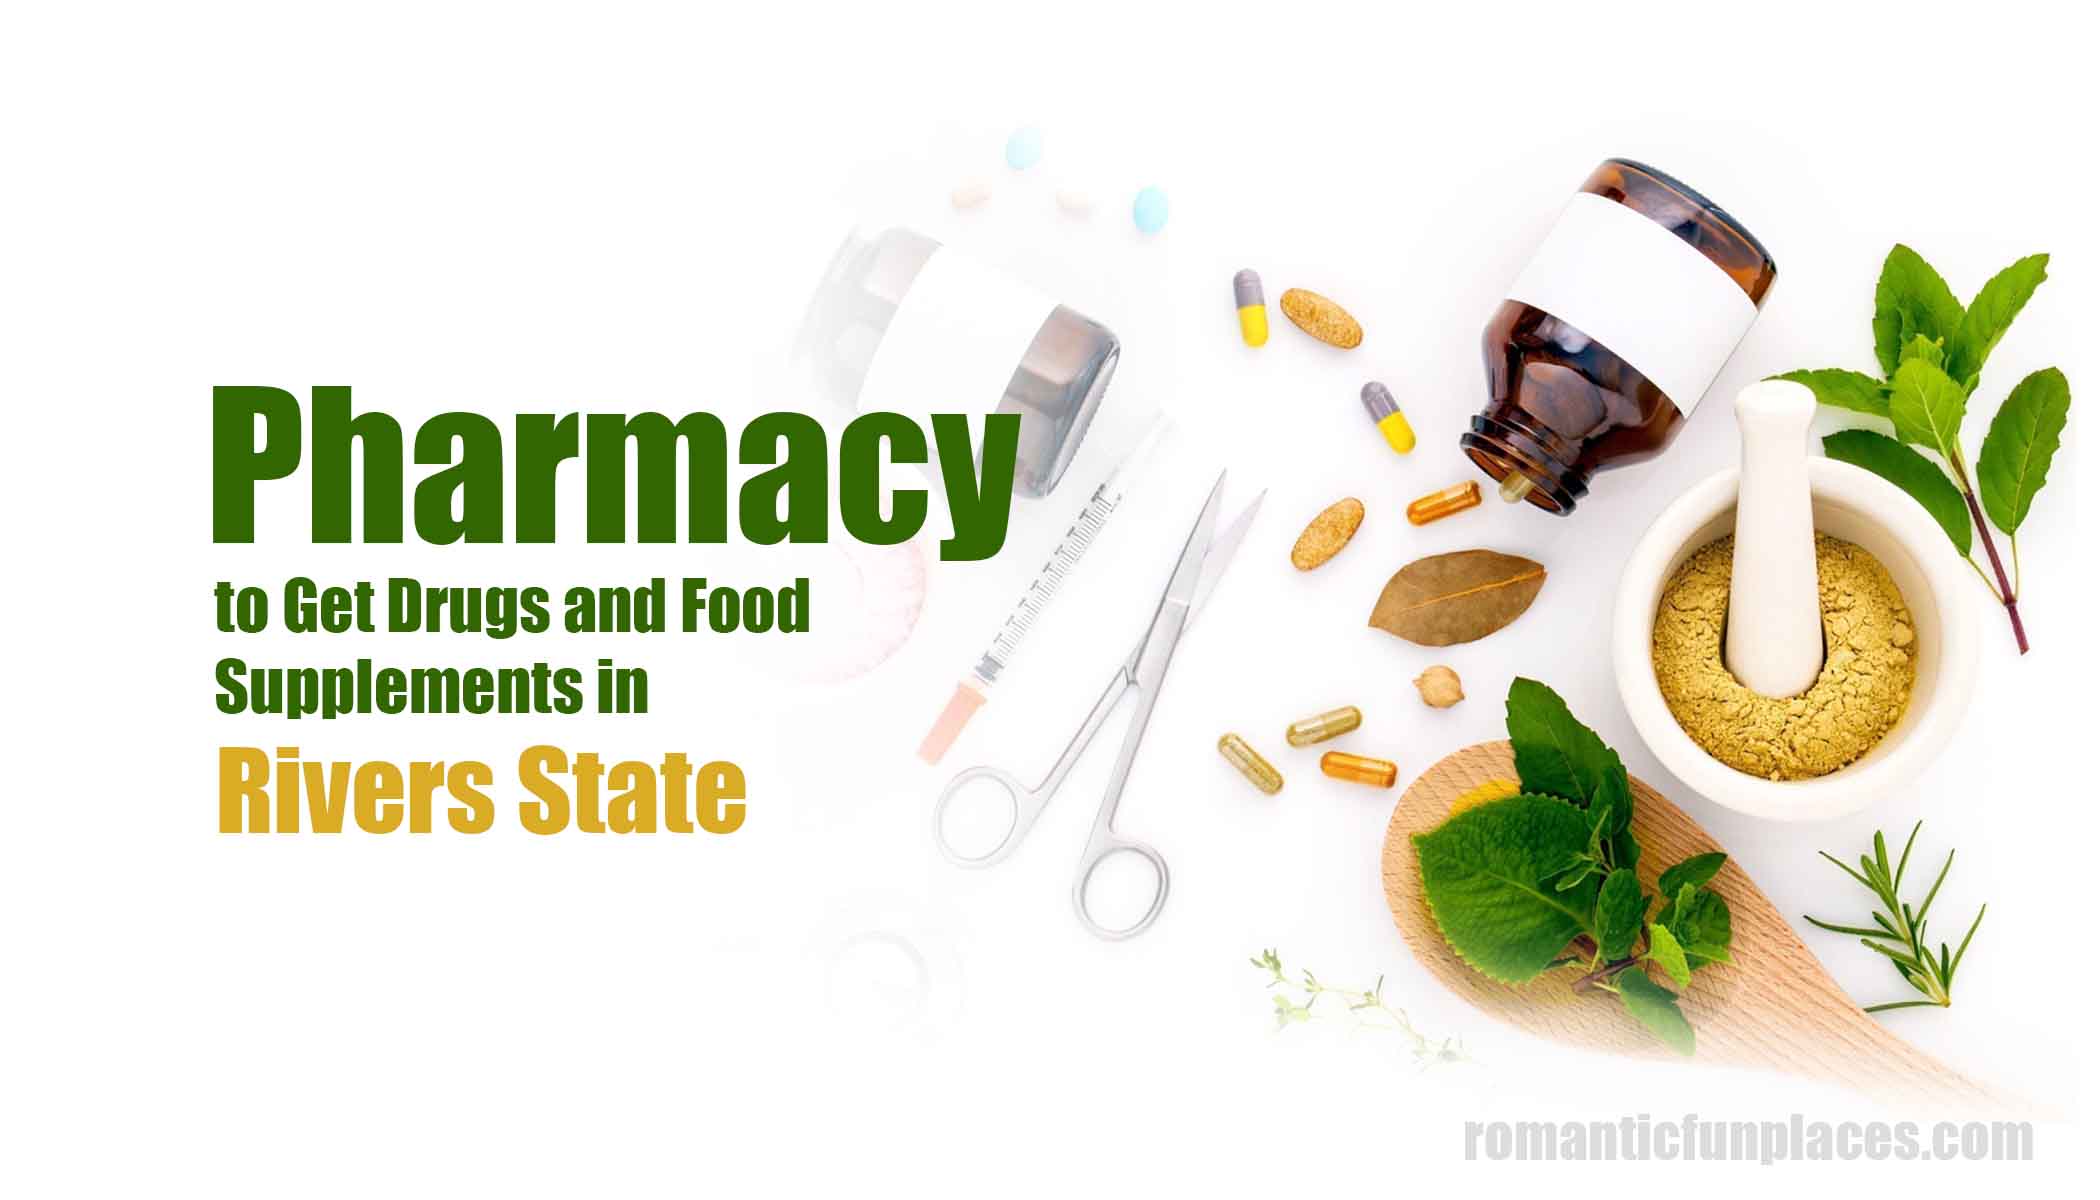 Pharmacy to Get Drugs and Food Supplements in Rivers State